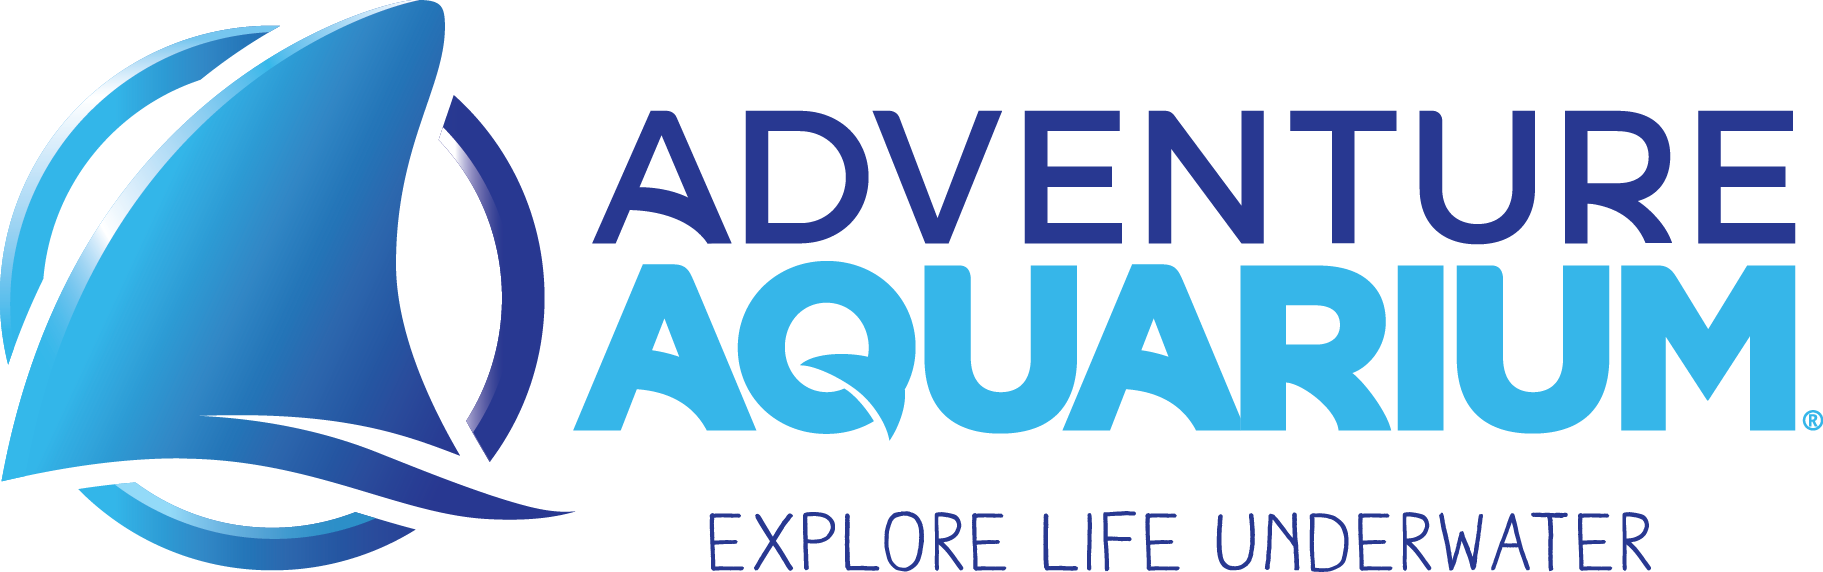 Oklahoma Aquarium - 🎉 🎉 🎉 We're proud to share our NEW LOGO! 🎉 🎉 🎉  The Oklahoma Aquarium is preparing to celebrate our 20th year in 2023 &  we're excited to